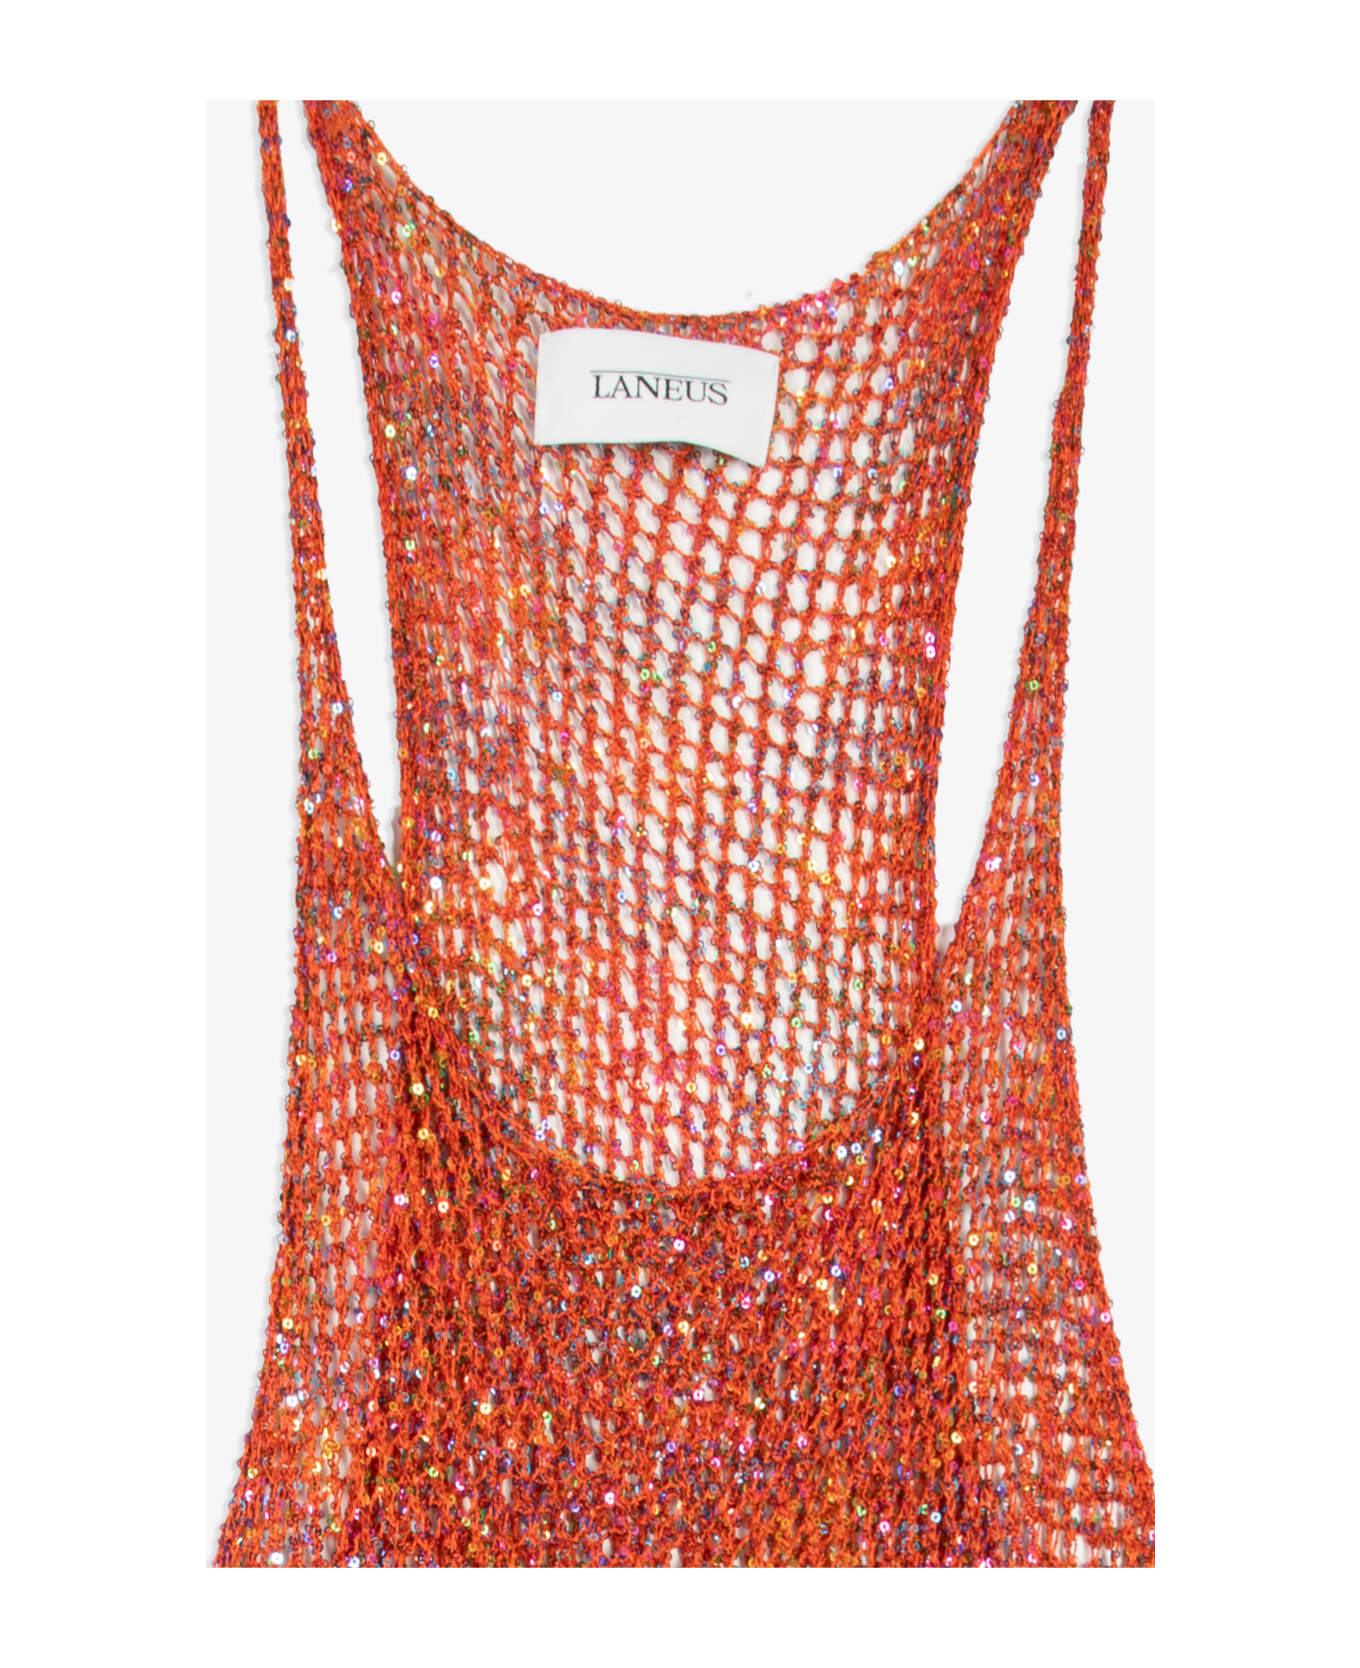 Laneus Pailletes Tank Woman Orange net knitted short dress with sequins - Corallo タンクトップ